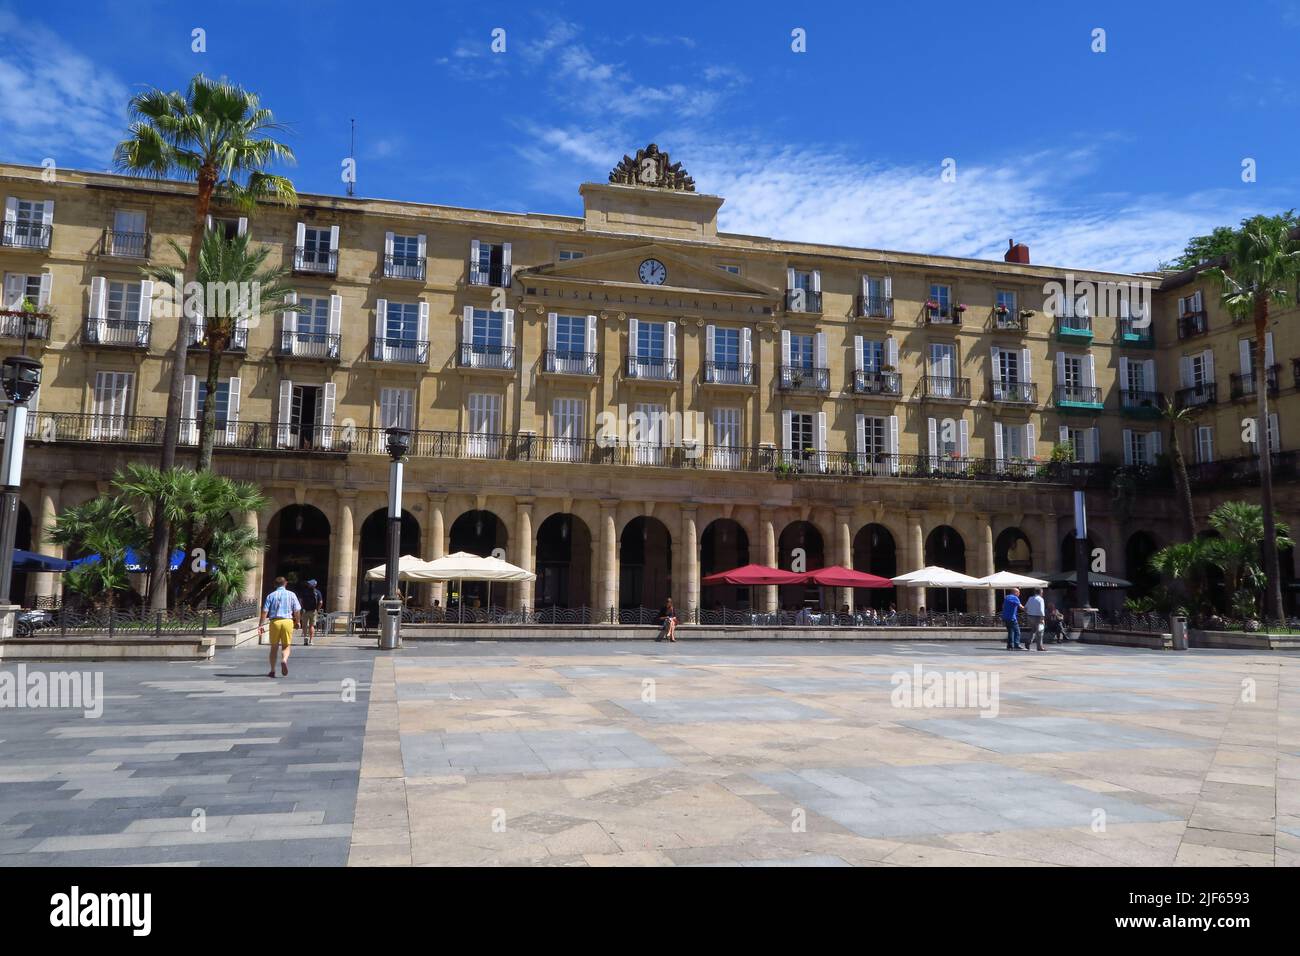 Plaza Nueva, a neoclassical square in the old town of the Spanish city of Bilbao houses numerous shops, bars and restaurants as well as apartments abo Stock Photo